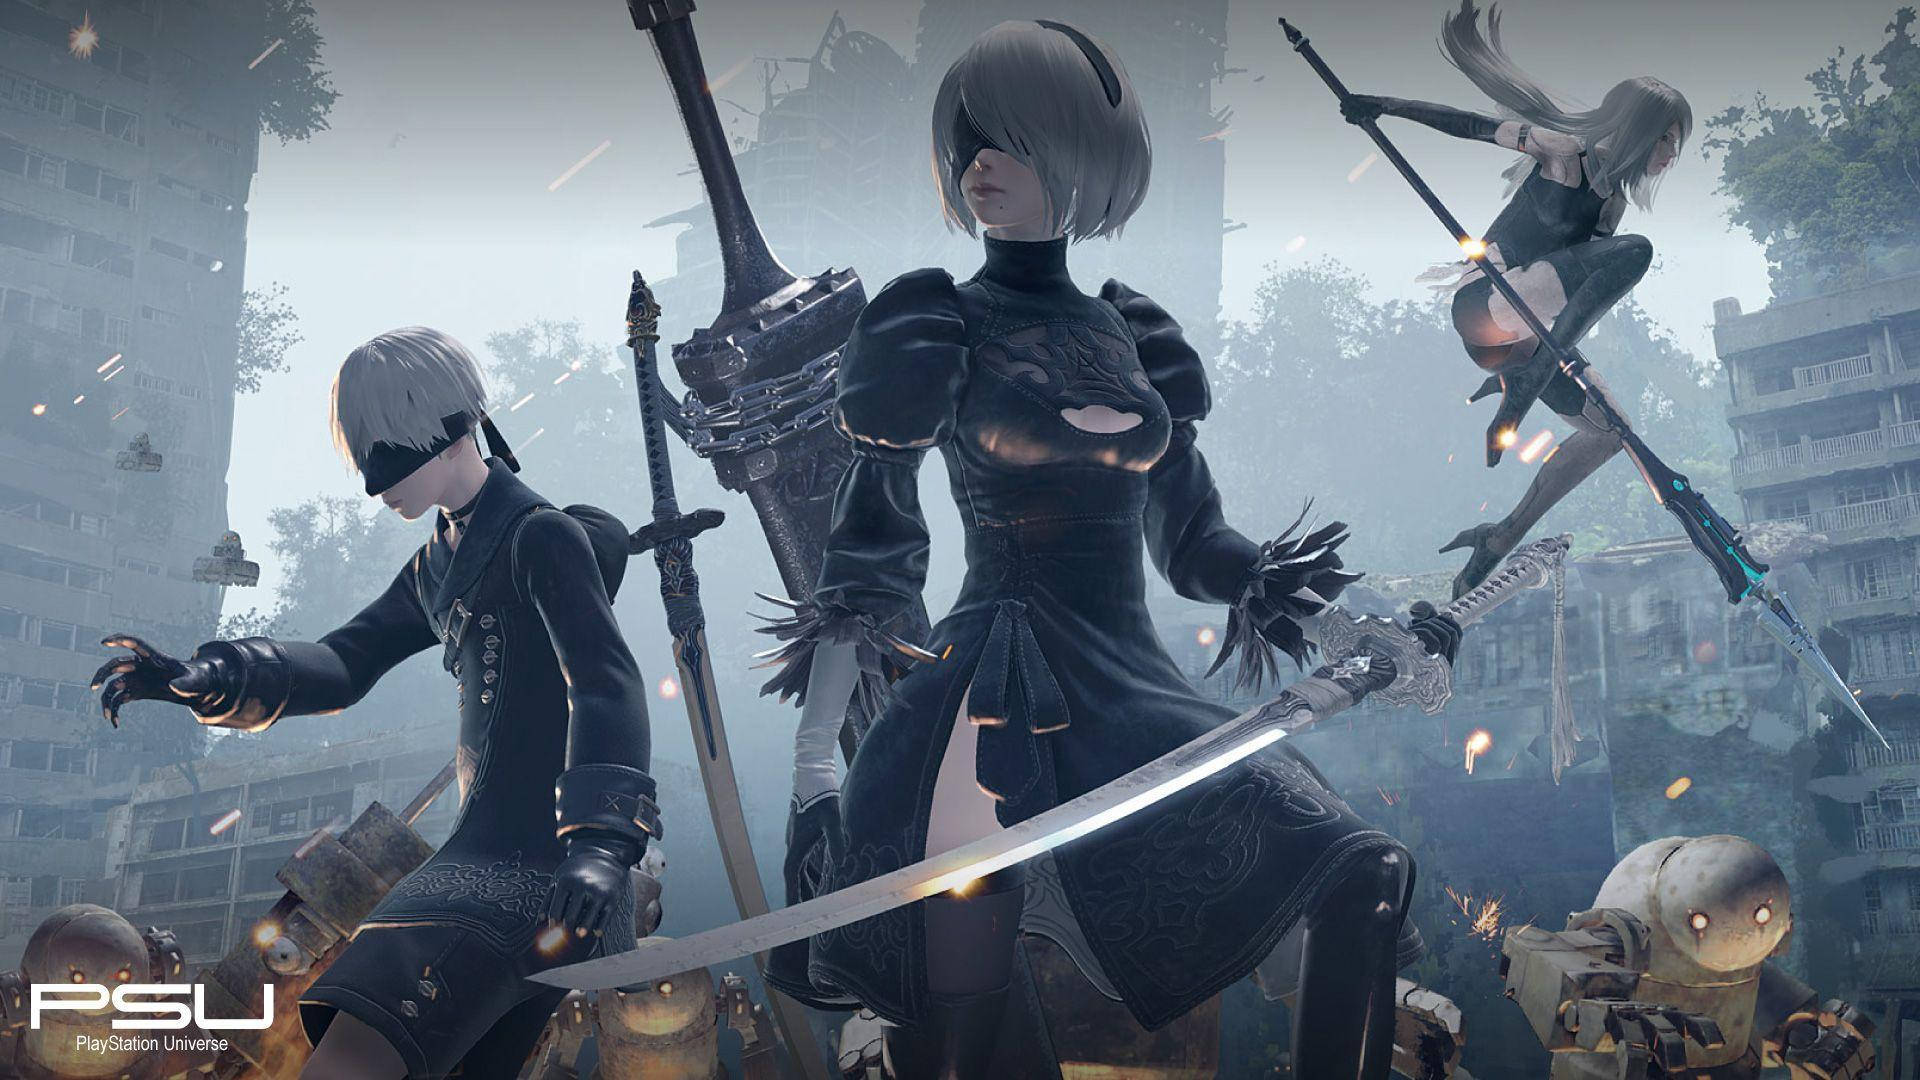 Nier Automata Androids 2b, 9s And A2 Fighting